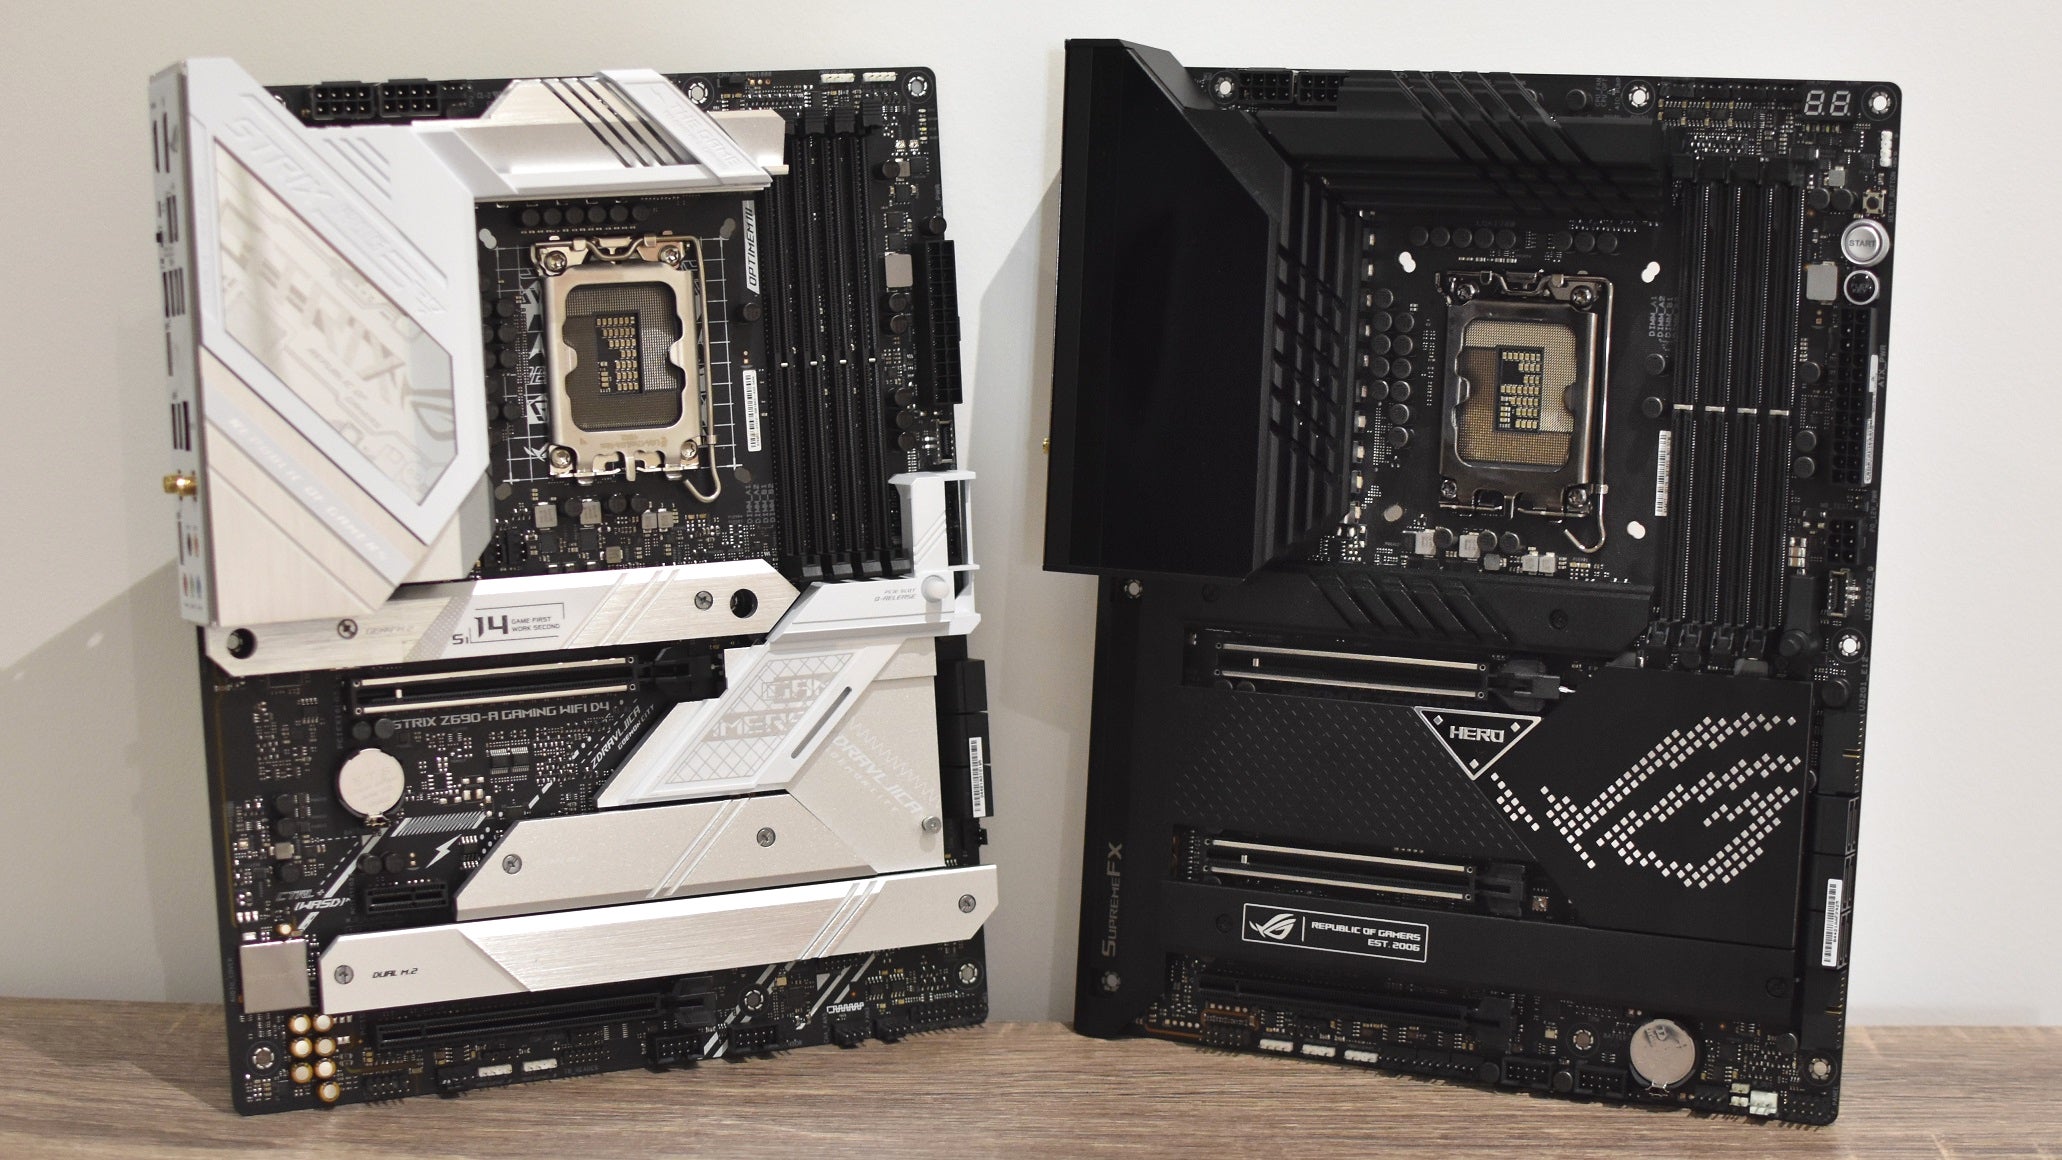 The Asus ROG Strix Z690-A Gaming WiFi D4 propped upright next to an Asus ROG Maximus Z690 Hero motherboard.